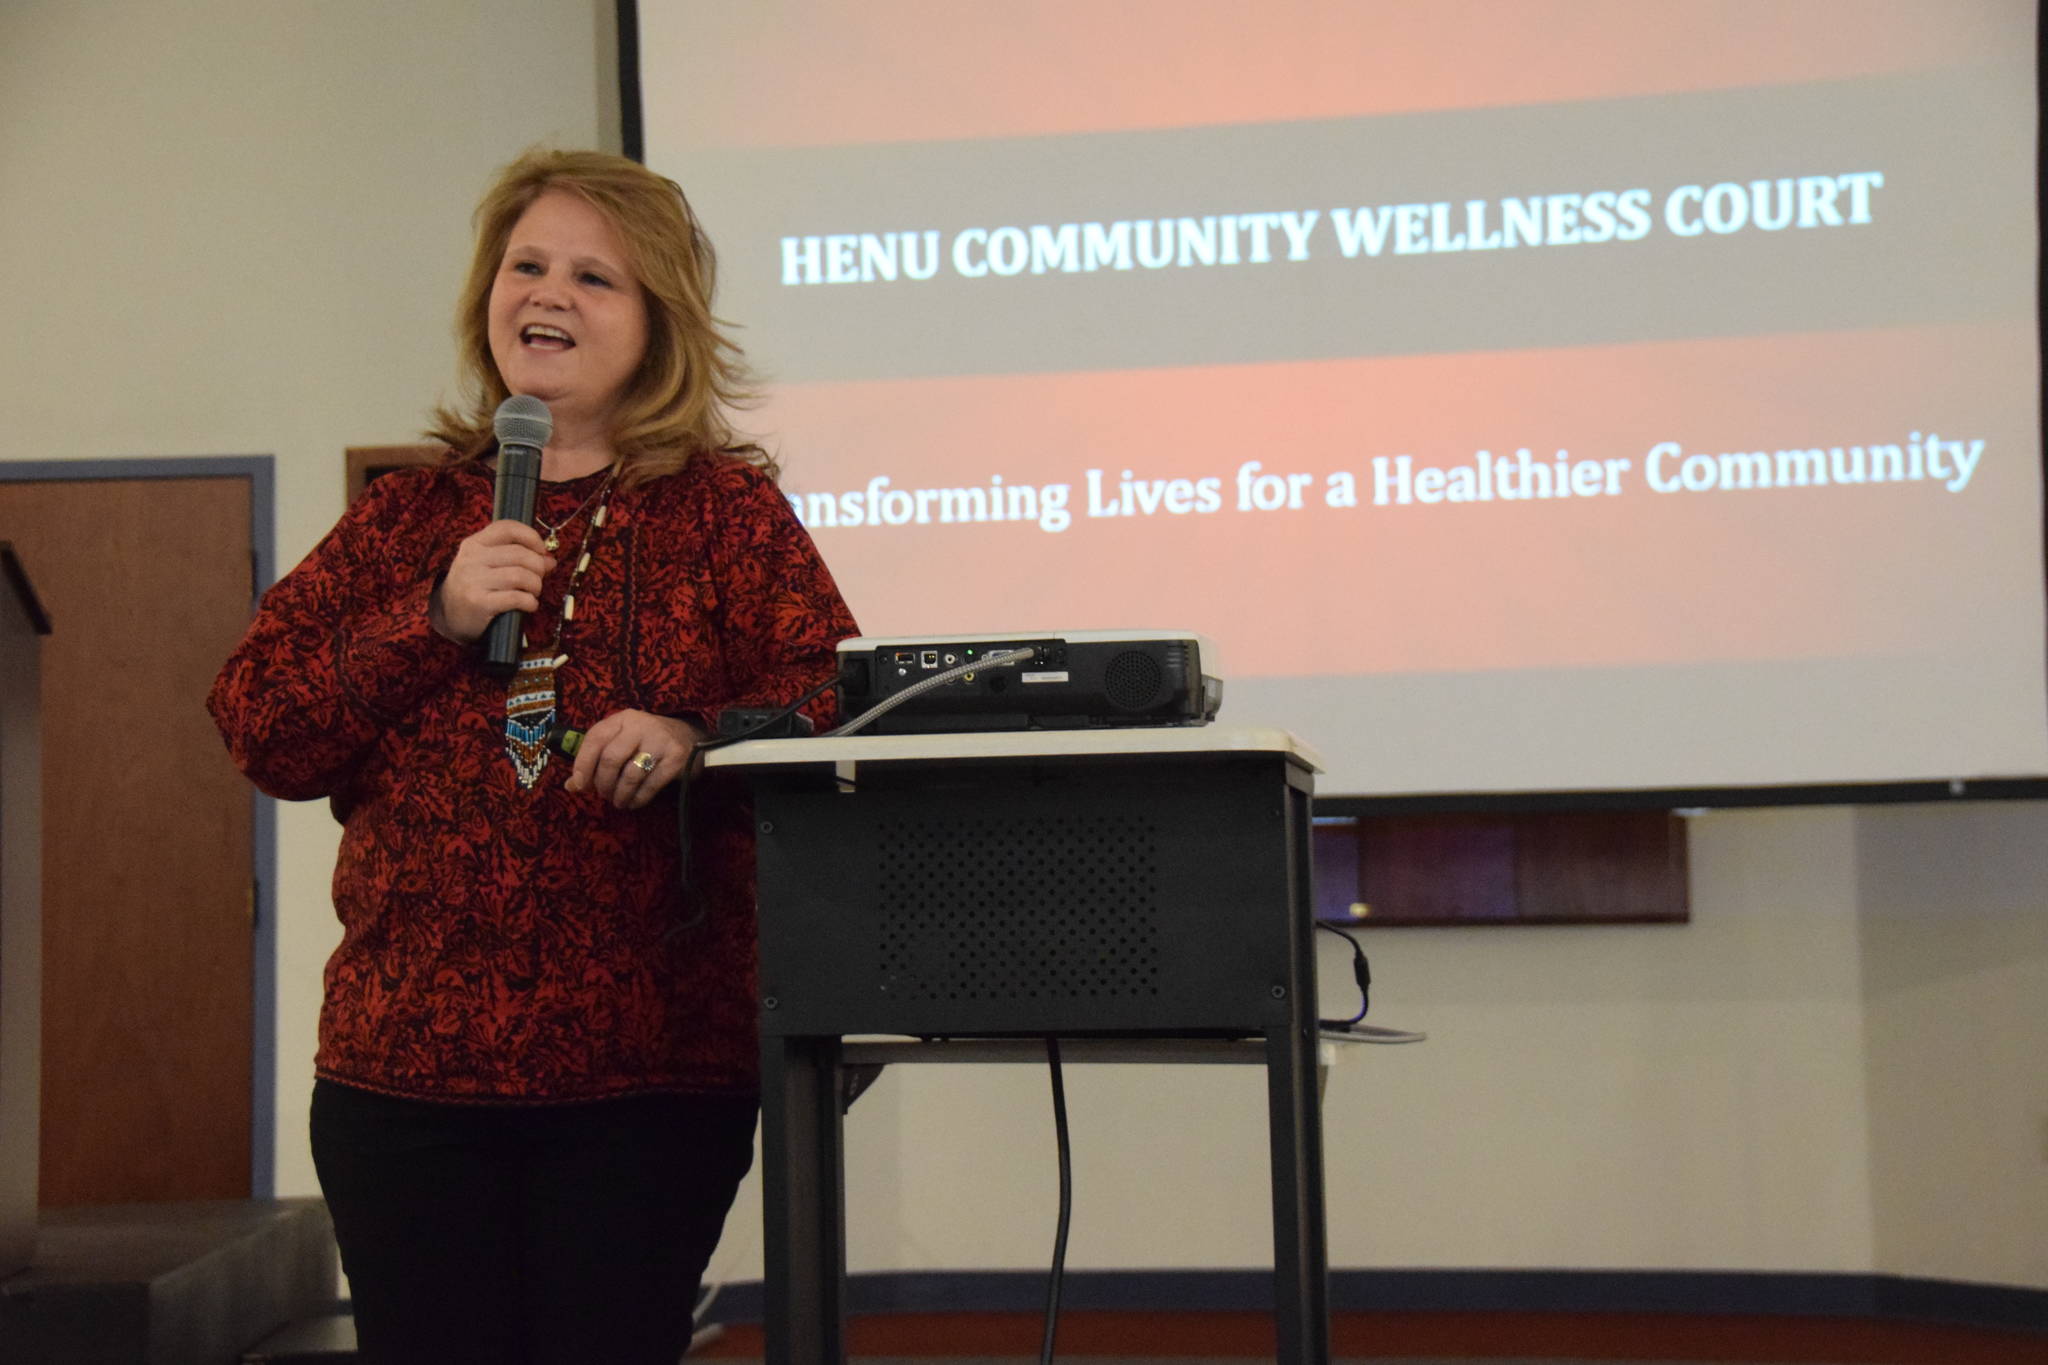 Judge Susan Wells gives a presentation about the Henu Community Wellness Court during the Kenai Chamber of Commerce Luncheon at the Visitor’s Center in Kenai, Alaska, on March 20, 2019. (Photo by Brian Mazurek/Peninsula Clarion)